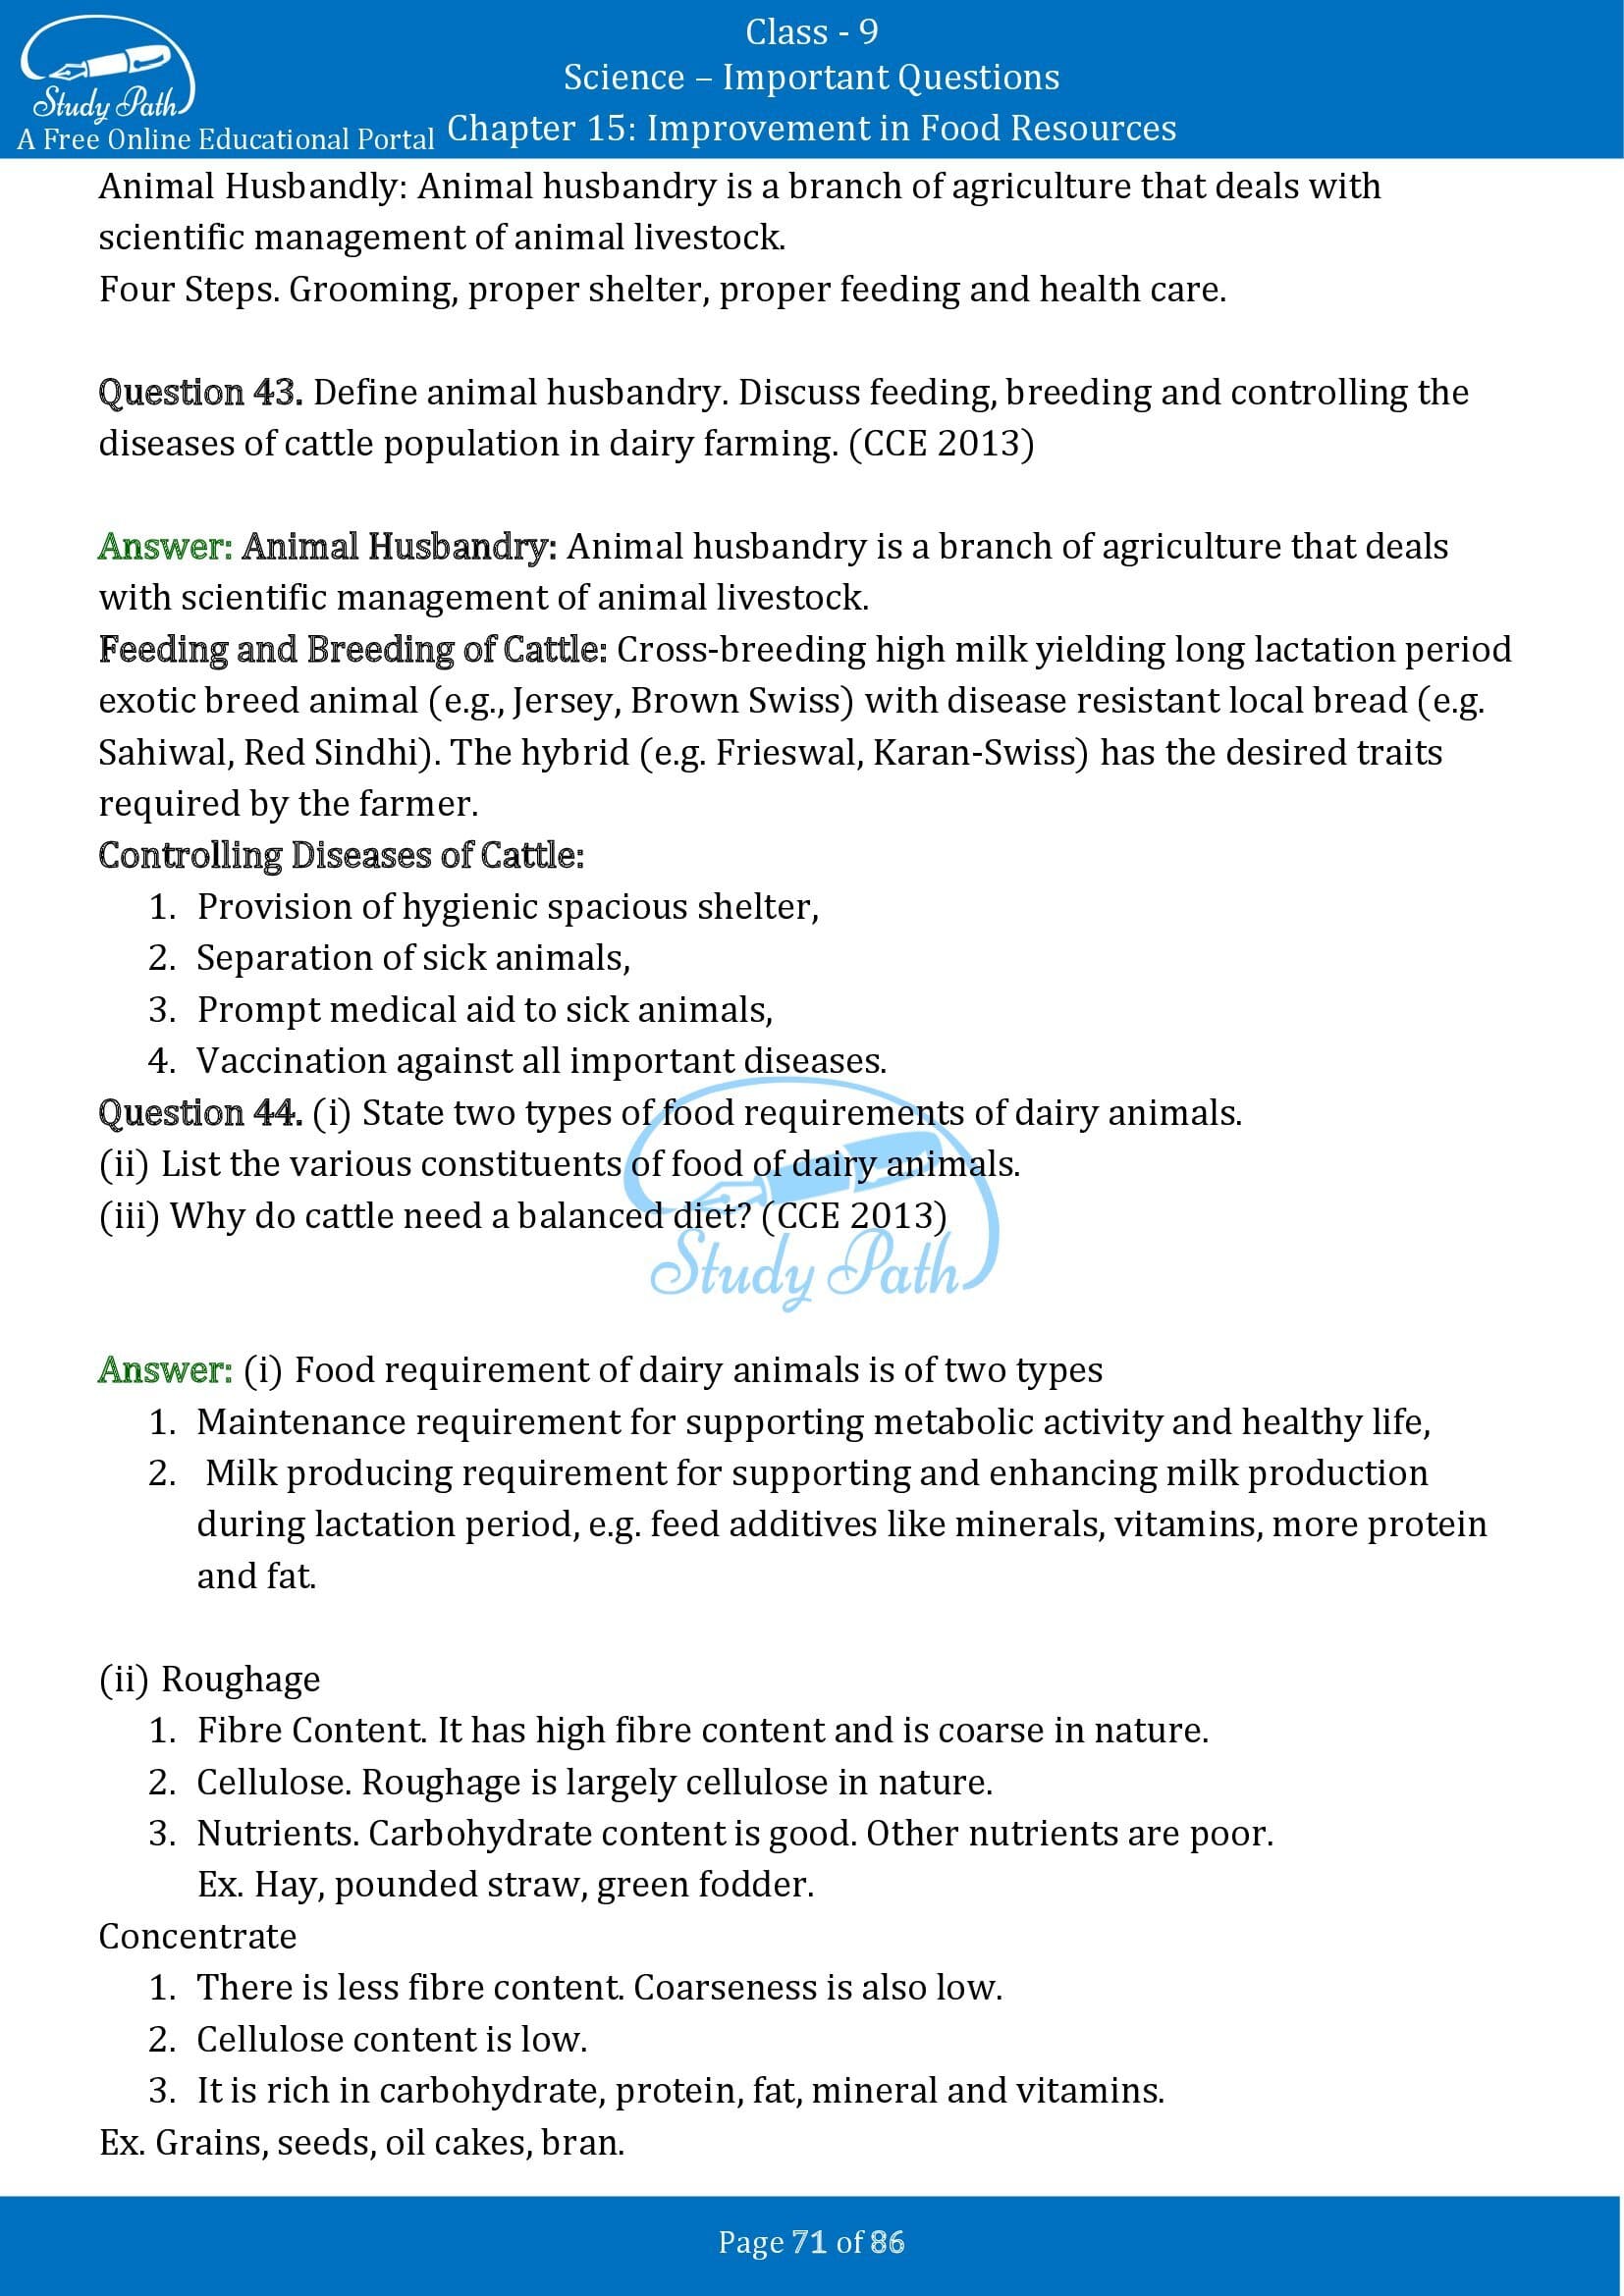 Important Questions for Class 9 Science Chapter 15 Improvement in Food Resources 00071